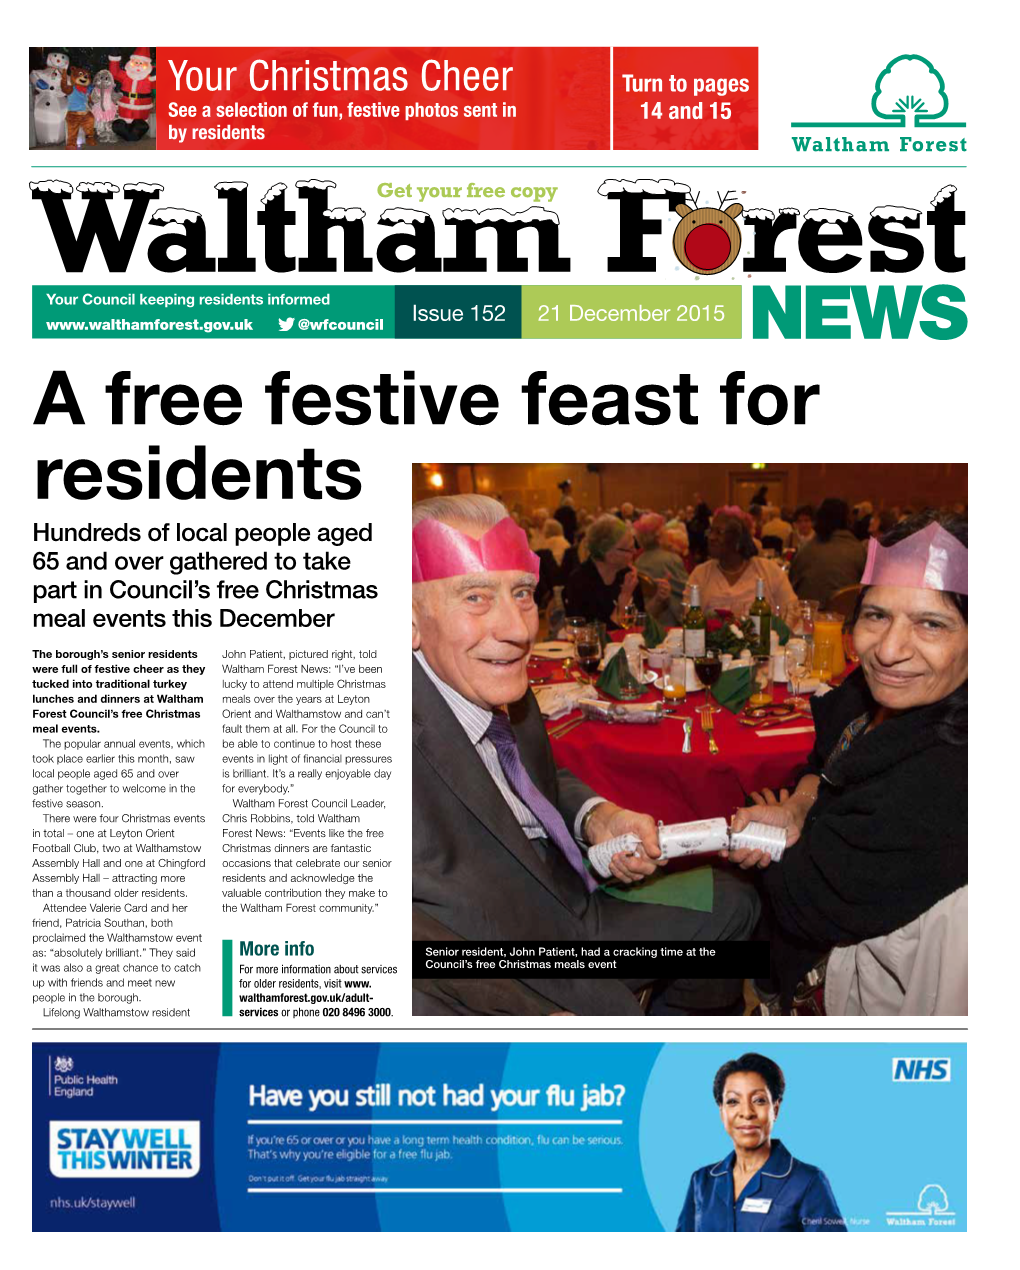 A Free Festive Feast for Residents Hundreds of Local People Aged 65 and Over Gathered to Take Part in Council’S Free Christmas Meal Events This December